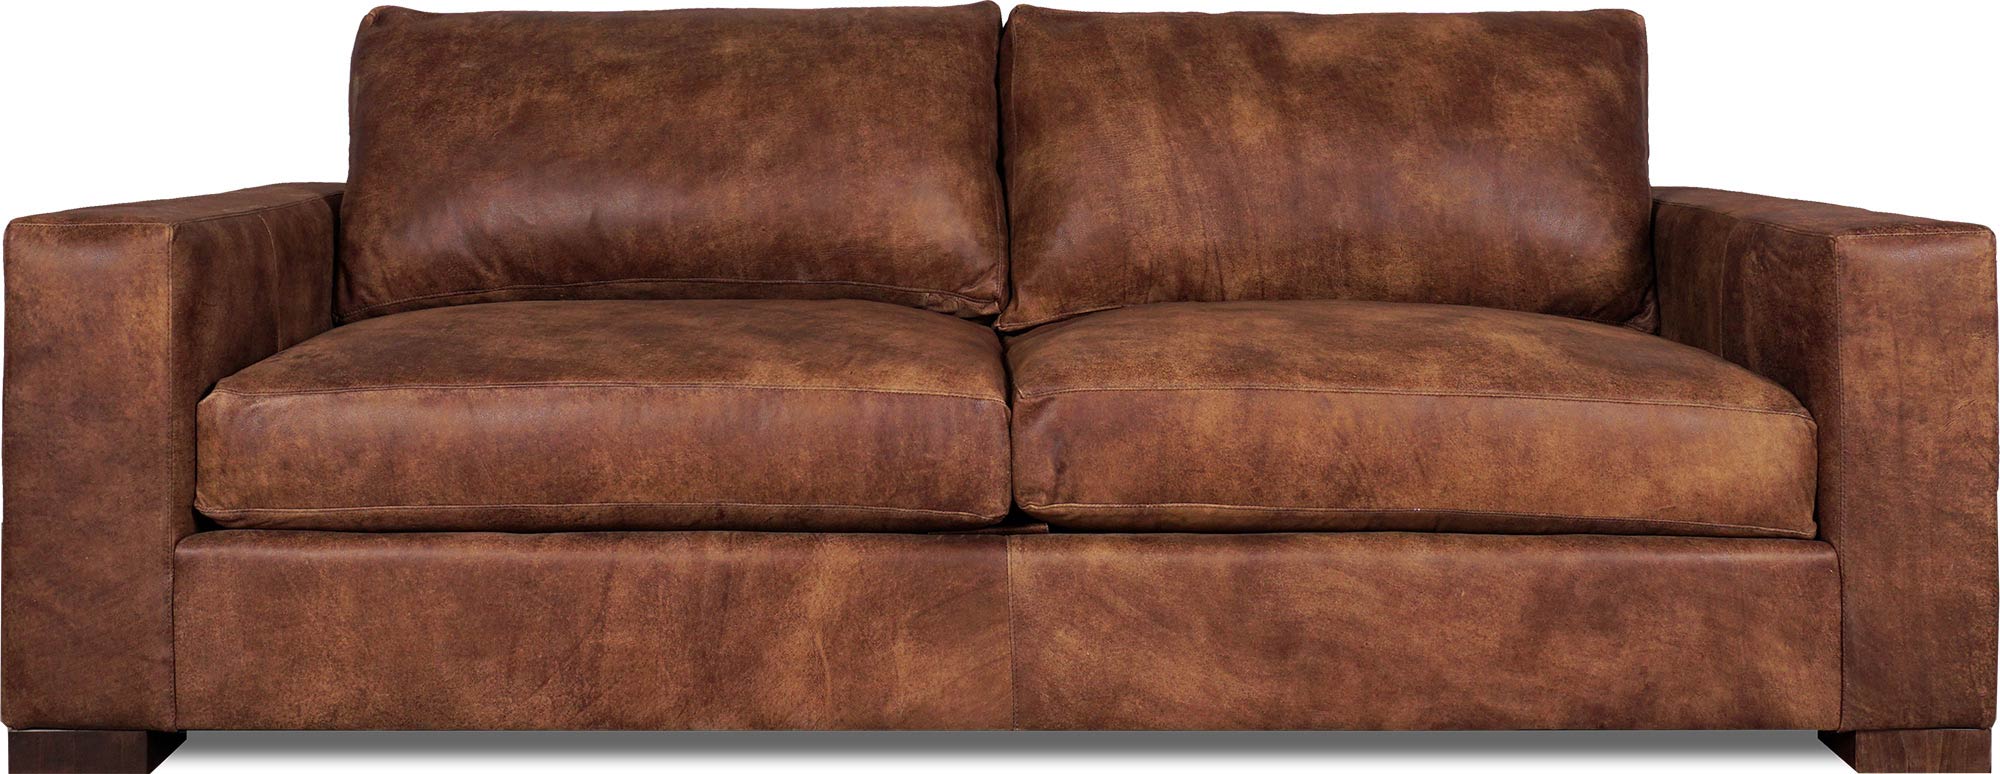 87 Cole sofa in Stallone Branch leather